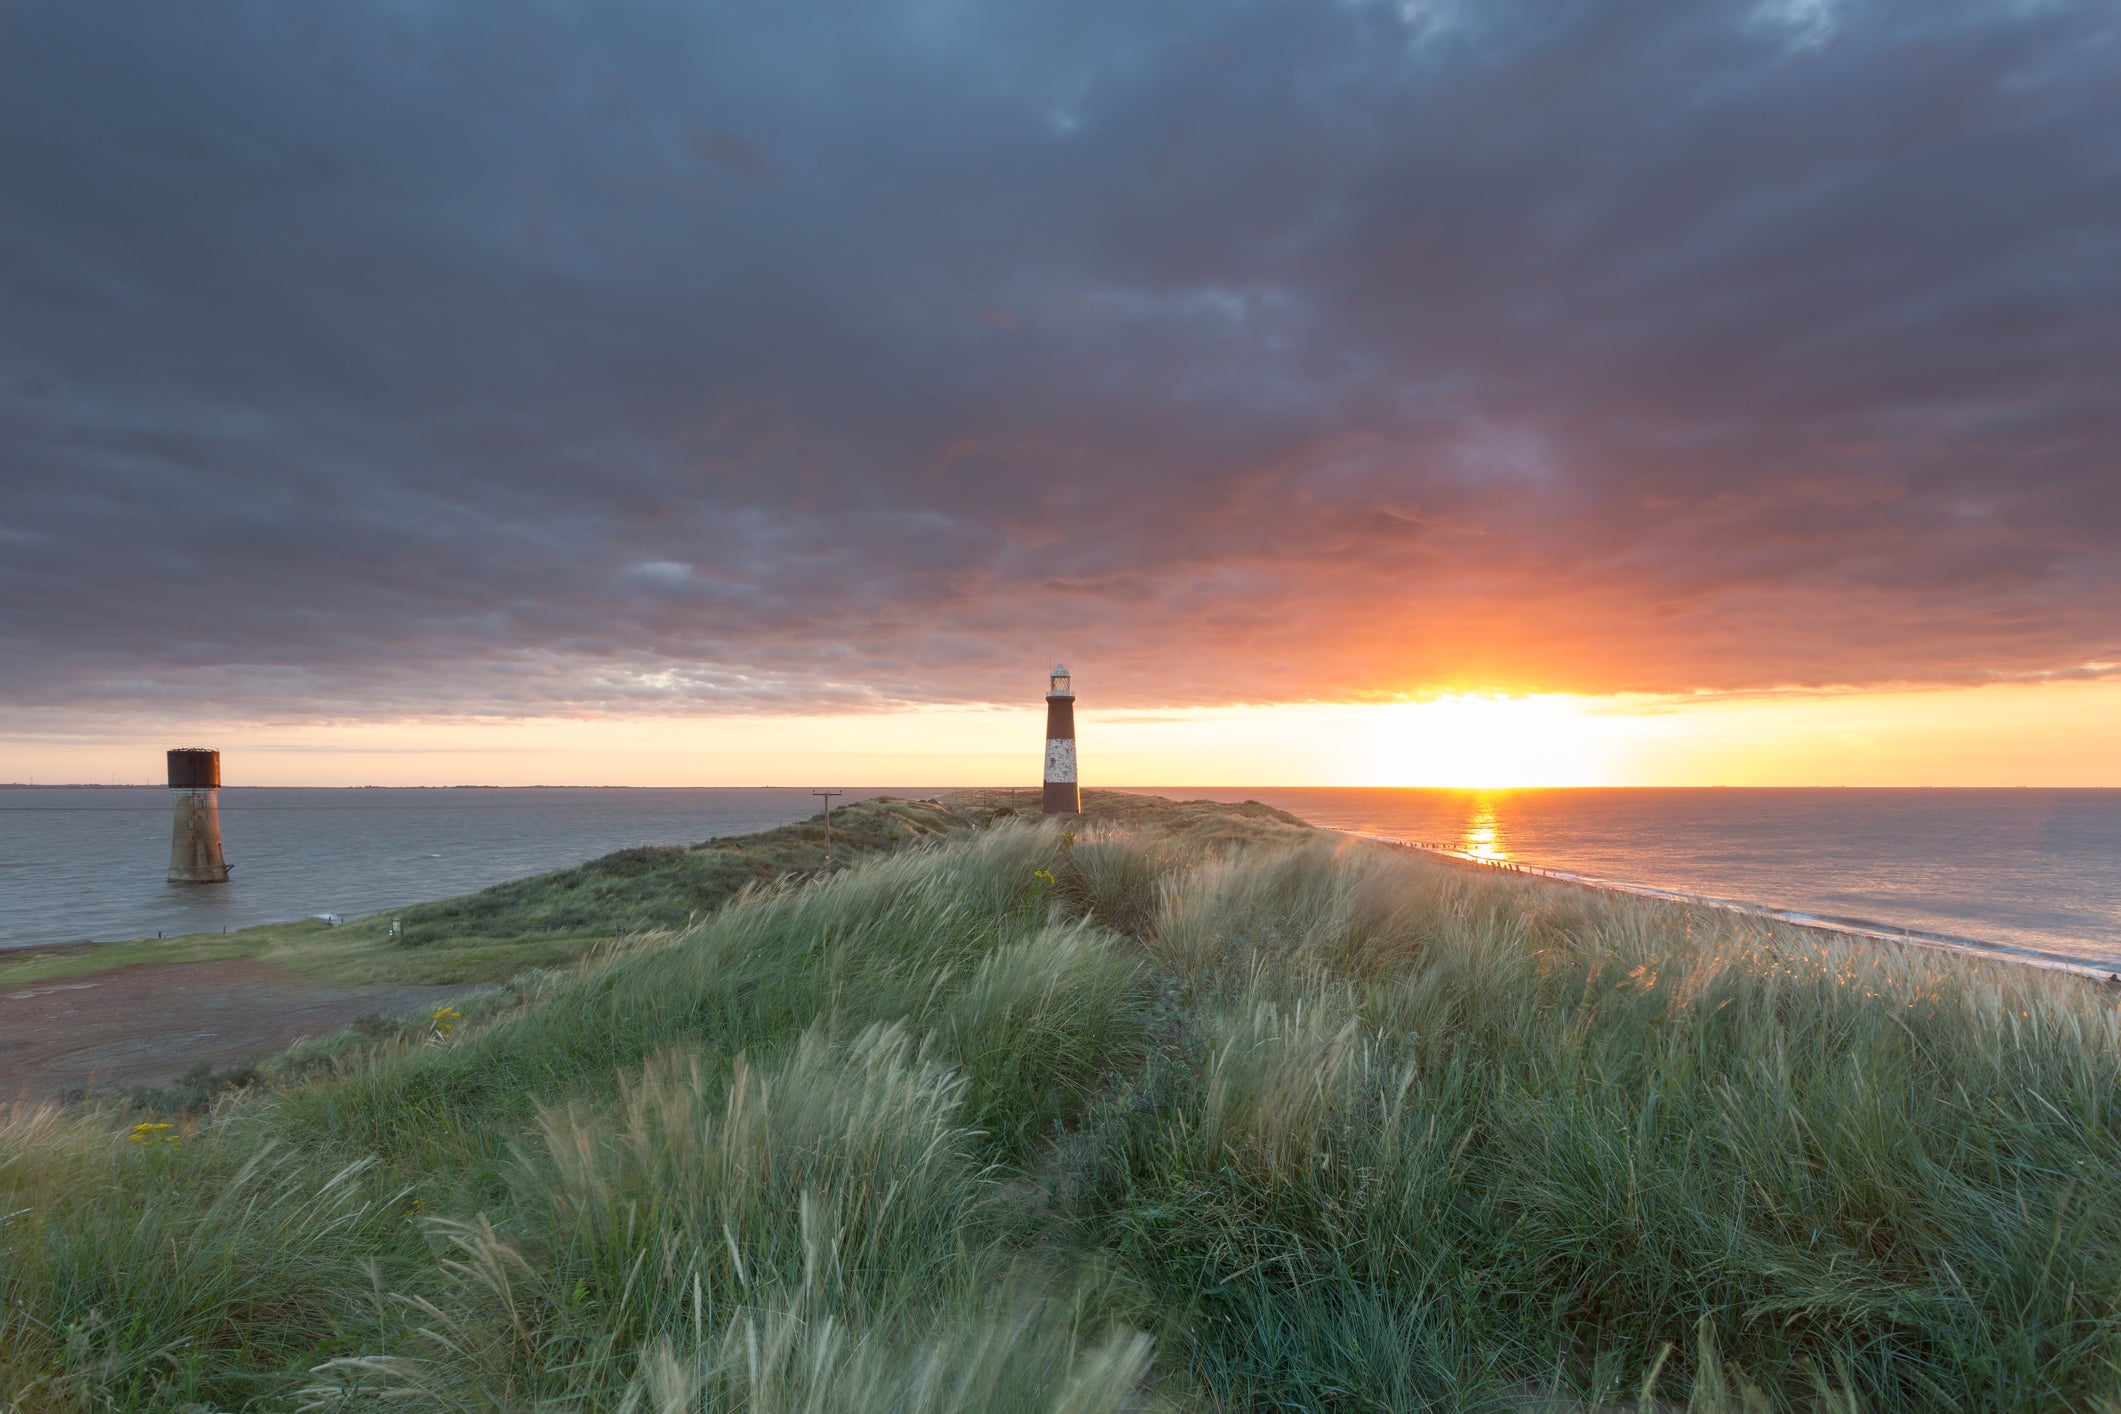 Spurn Head in the Humber Estuary, thought to be the location of the sunken town of Ravenser Odd